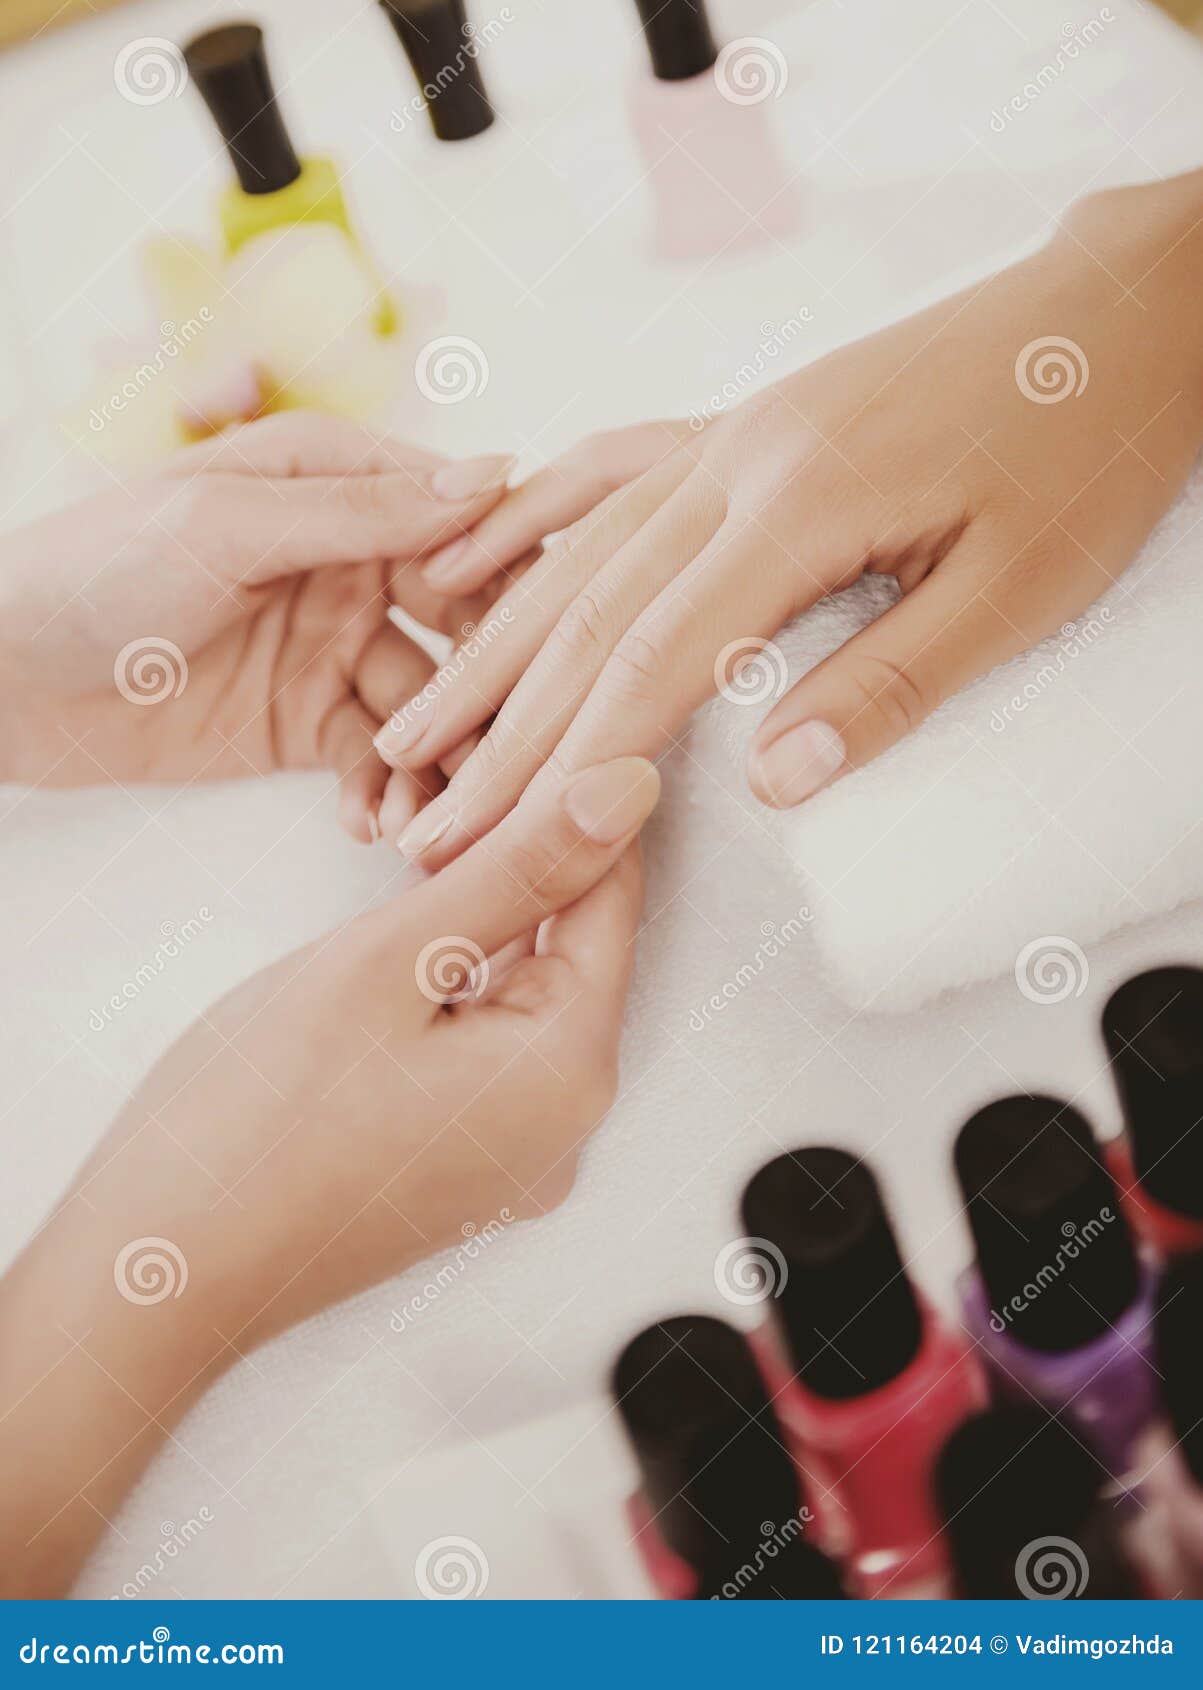 manicurist works with clients in beauty salon.